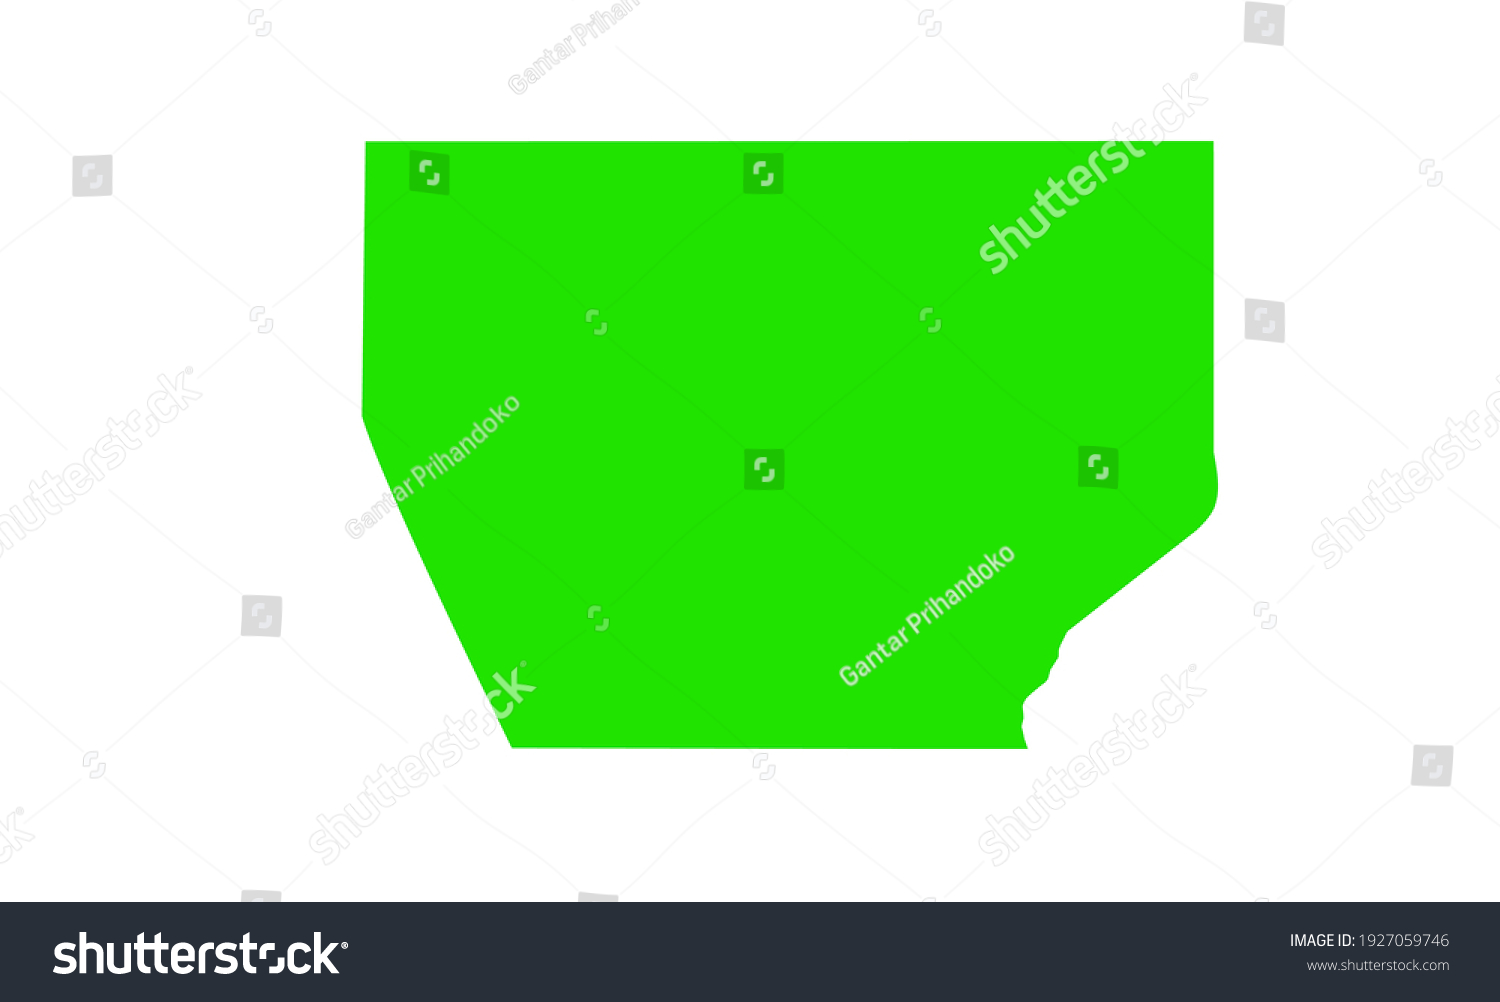 Green silhouette of Abyei city map in sudan on white background #1927059746